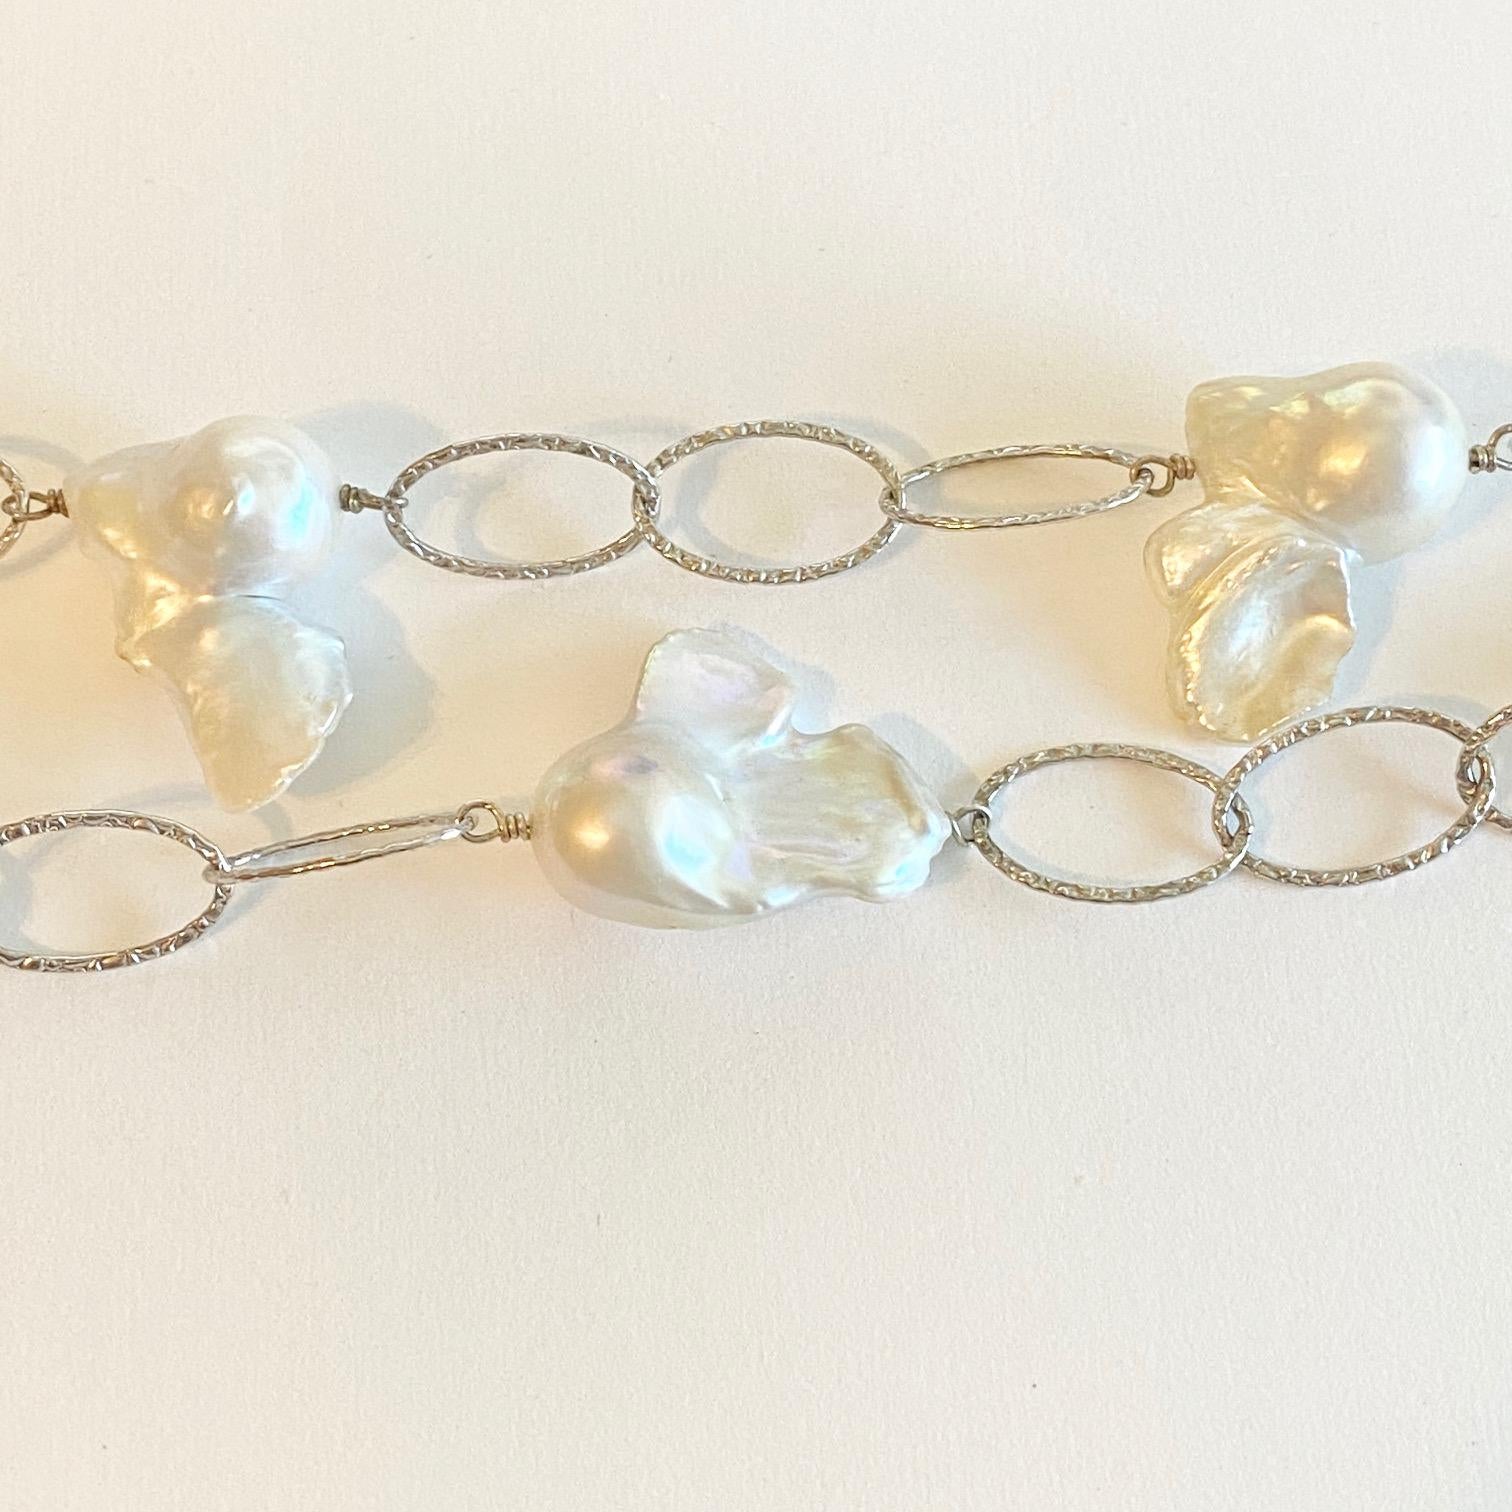 This sterling silver and pearl necklace has a charismatic personality to it that catches everyone's attention! It is made with real genuine  baroque pearls and is 36 inches long. The cultured freshwater pearls have unique and organic shapes to them,